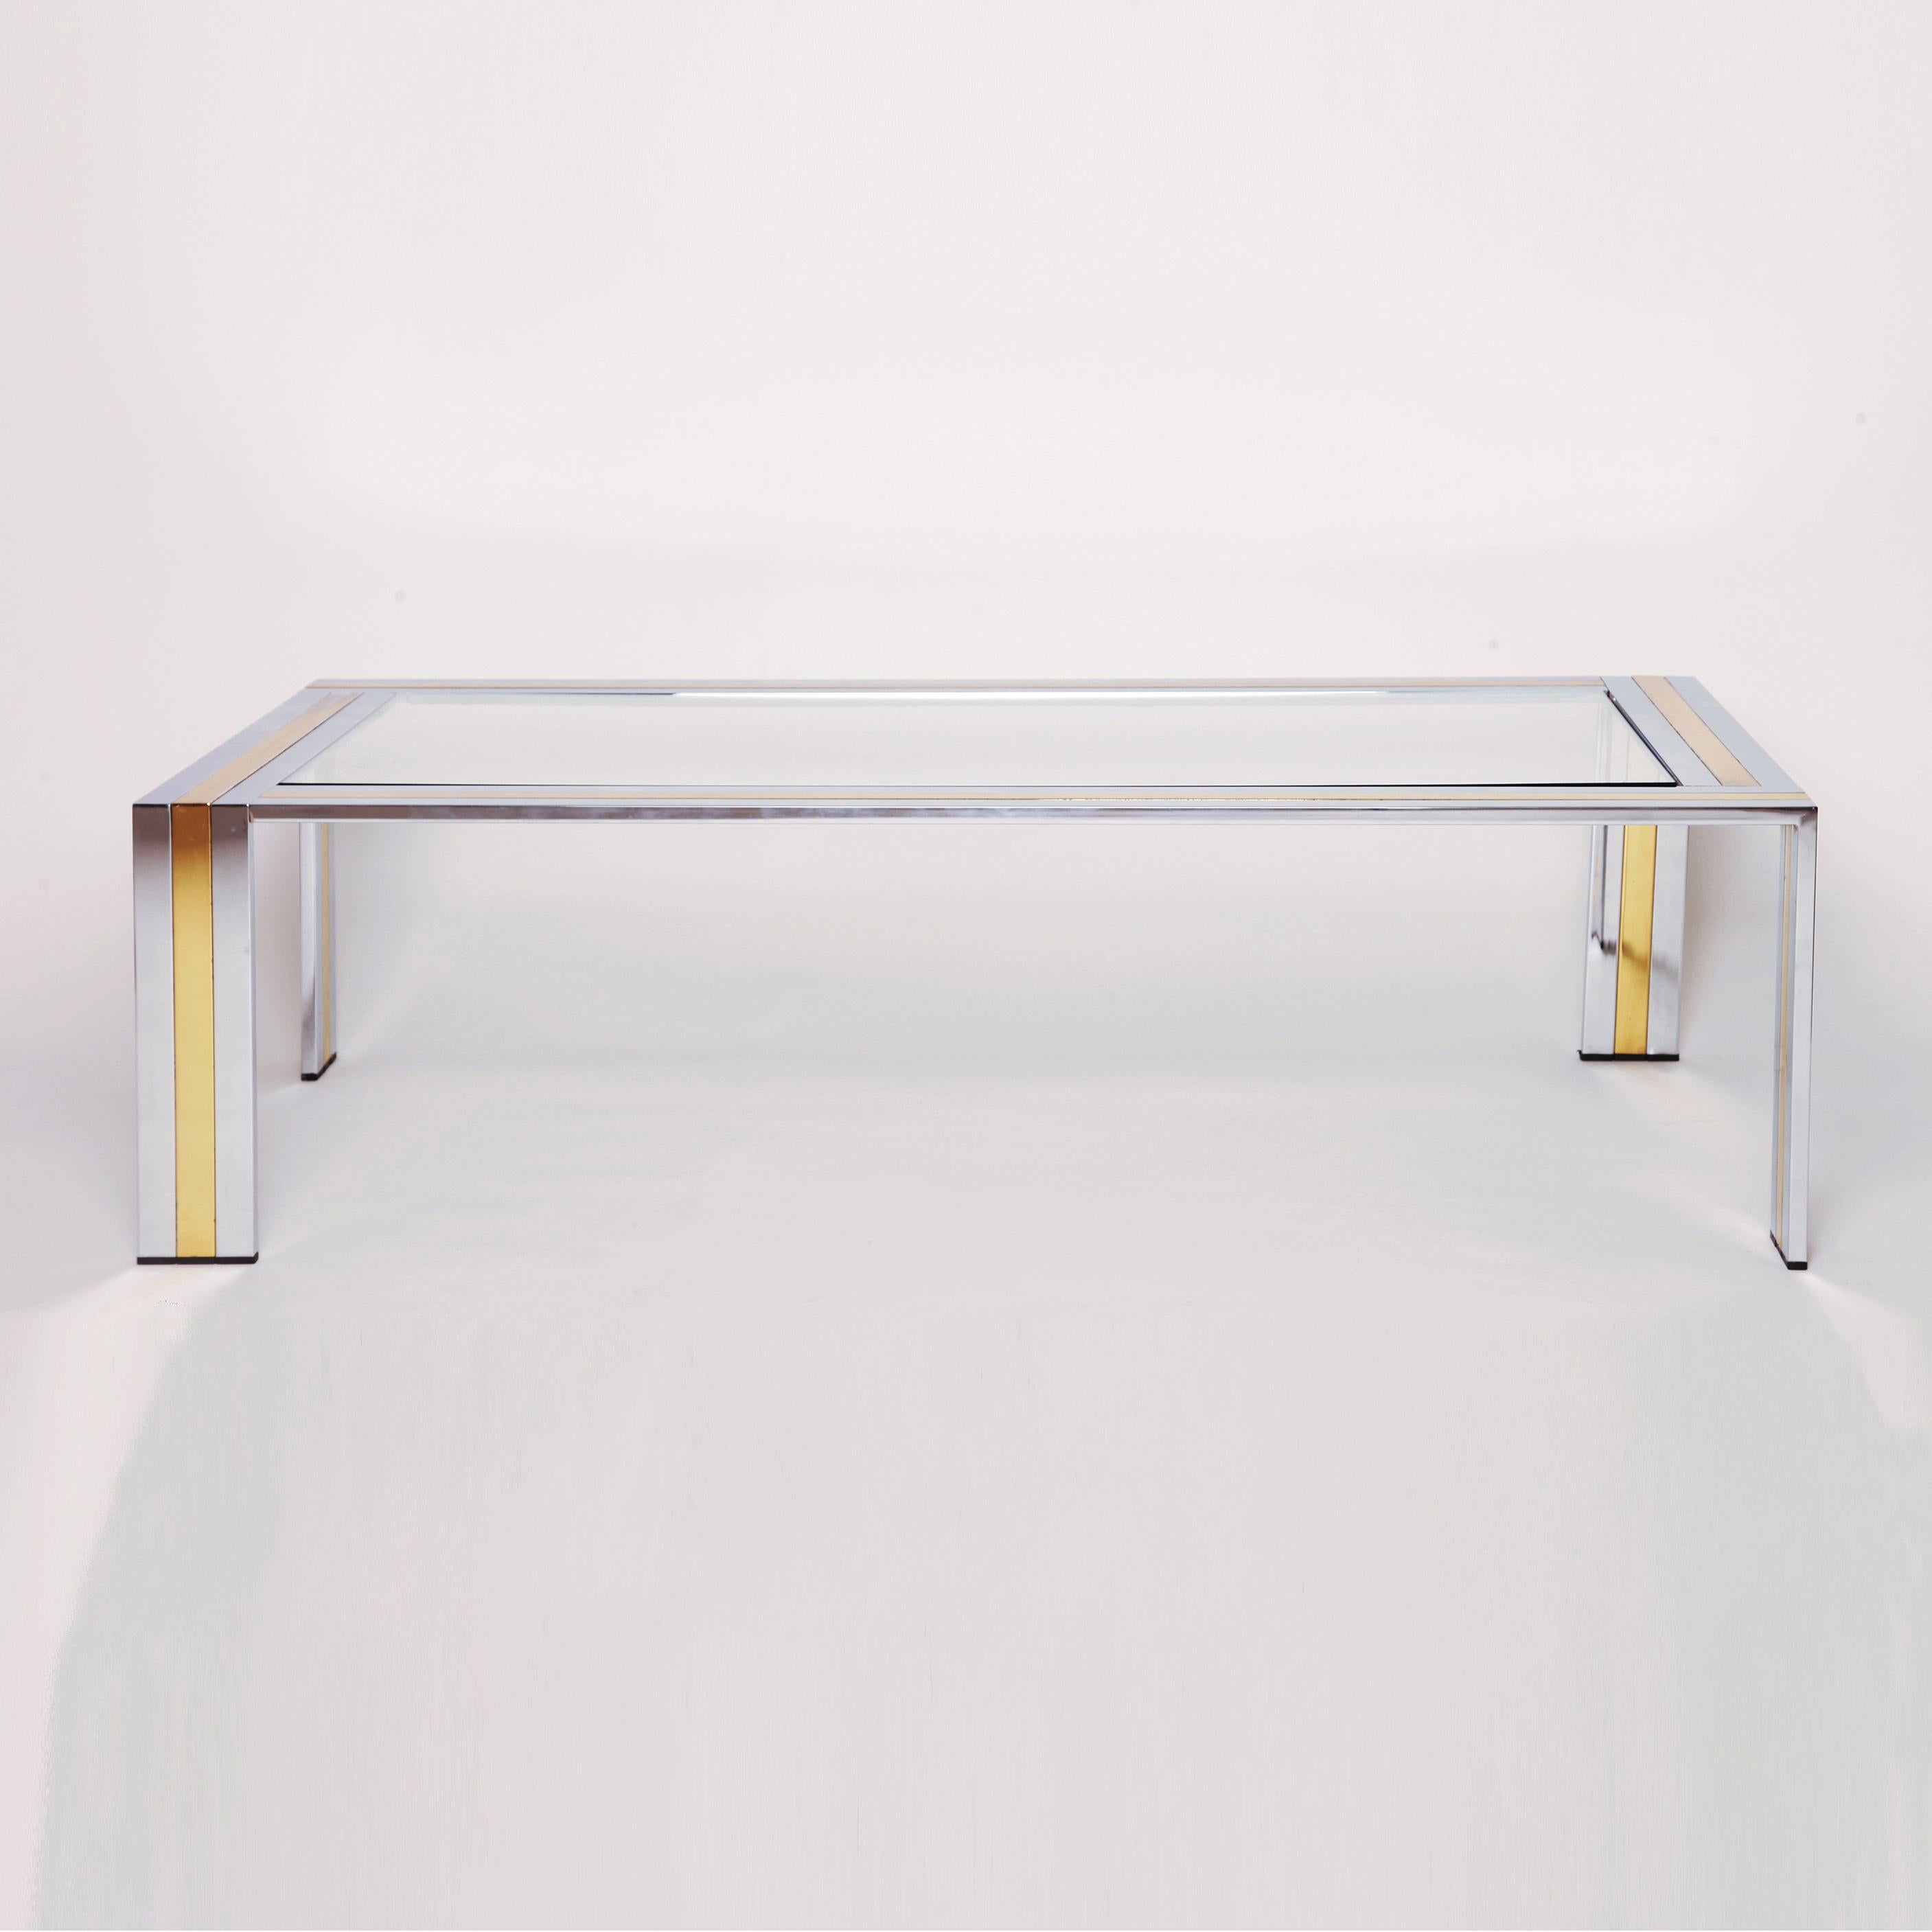 Chrome and brass rectangular coffee table attributed to Romeo Rega. Chrome stripped with a middle brass plated stripe. Clear glass top.